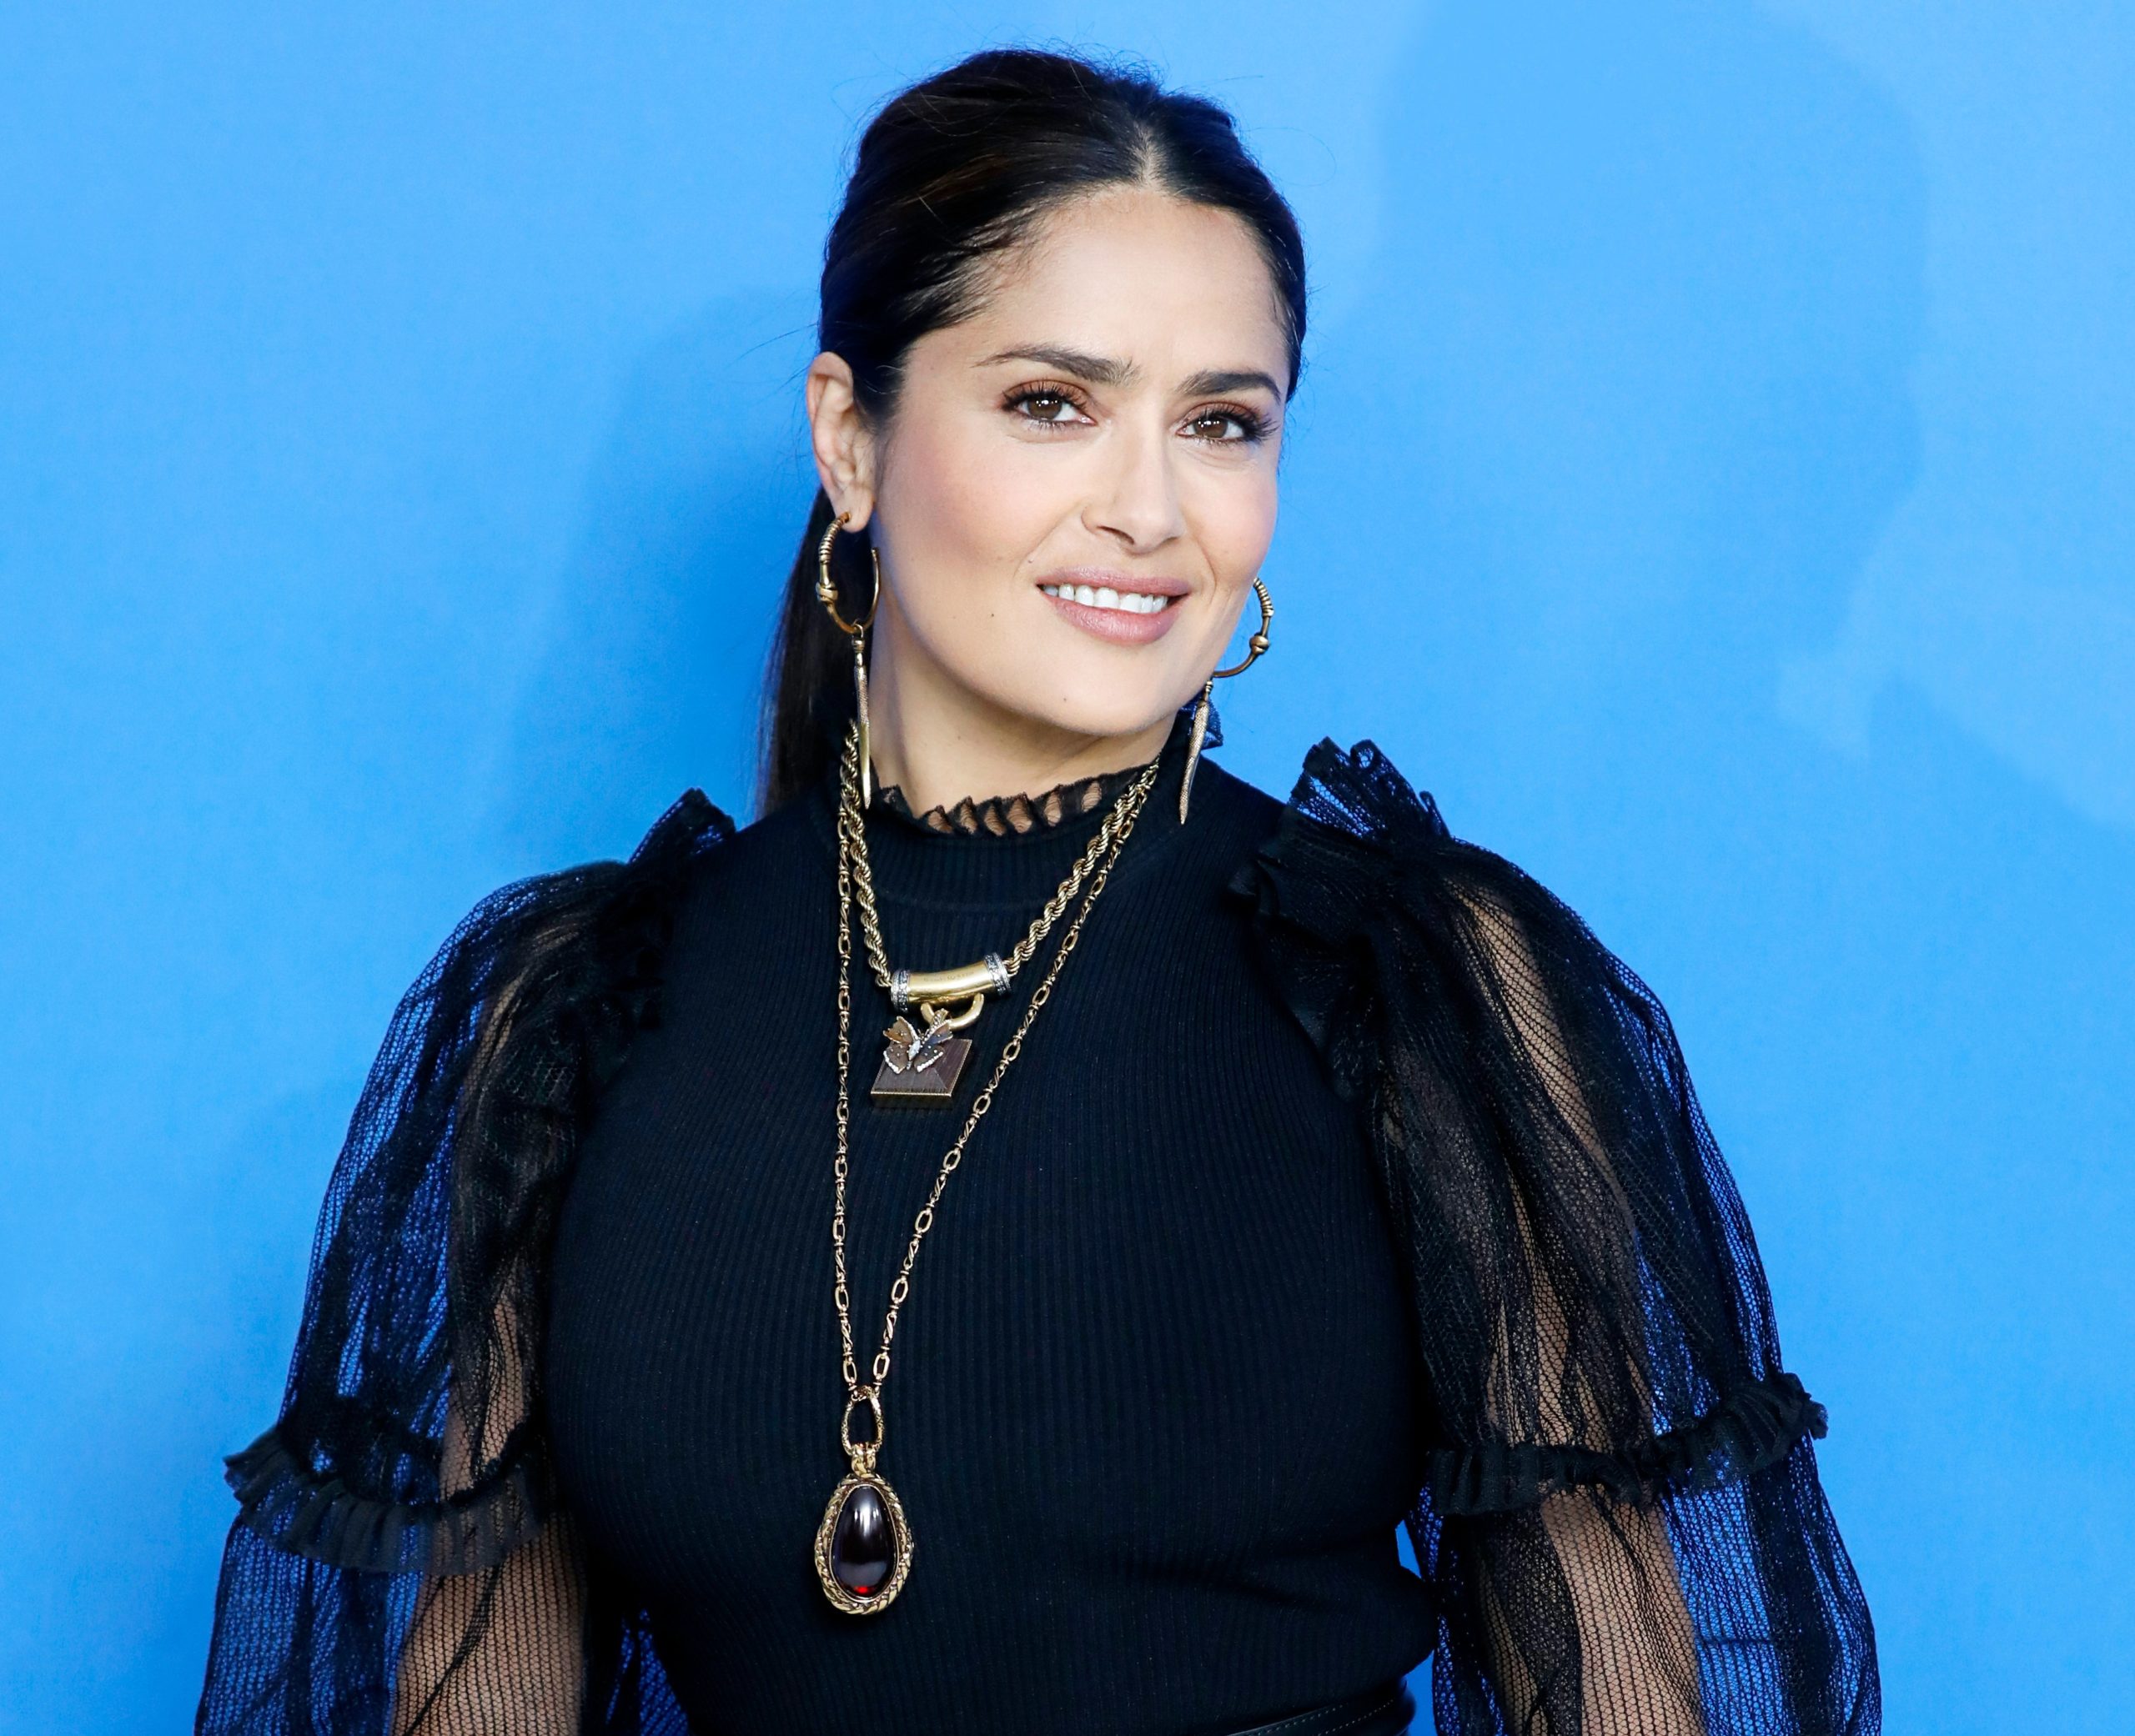 Salma Hayek Proudly Shows Off Gray Hair in Her Latest Glowing Selfie